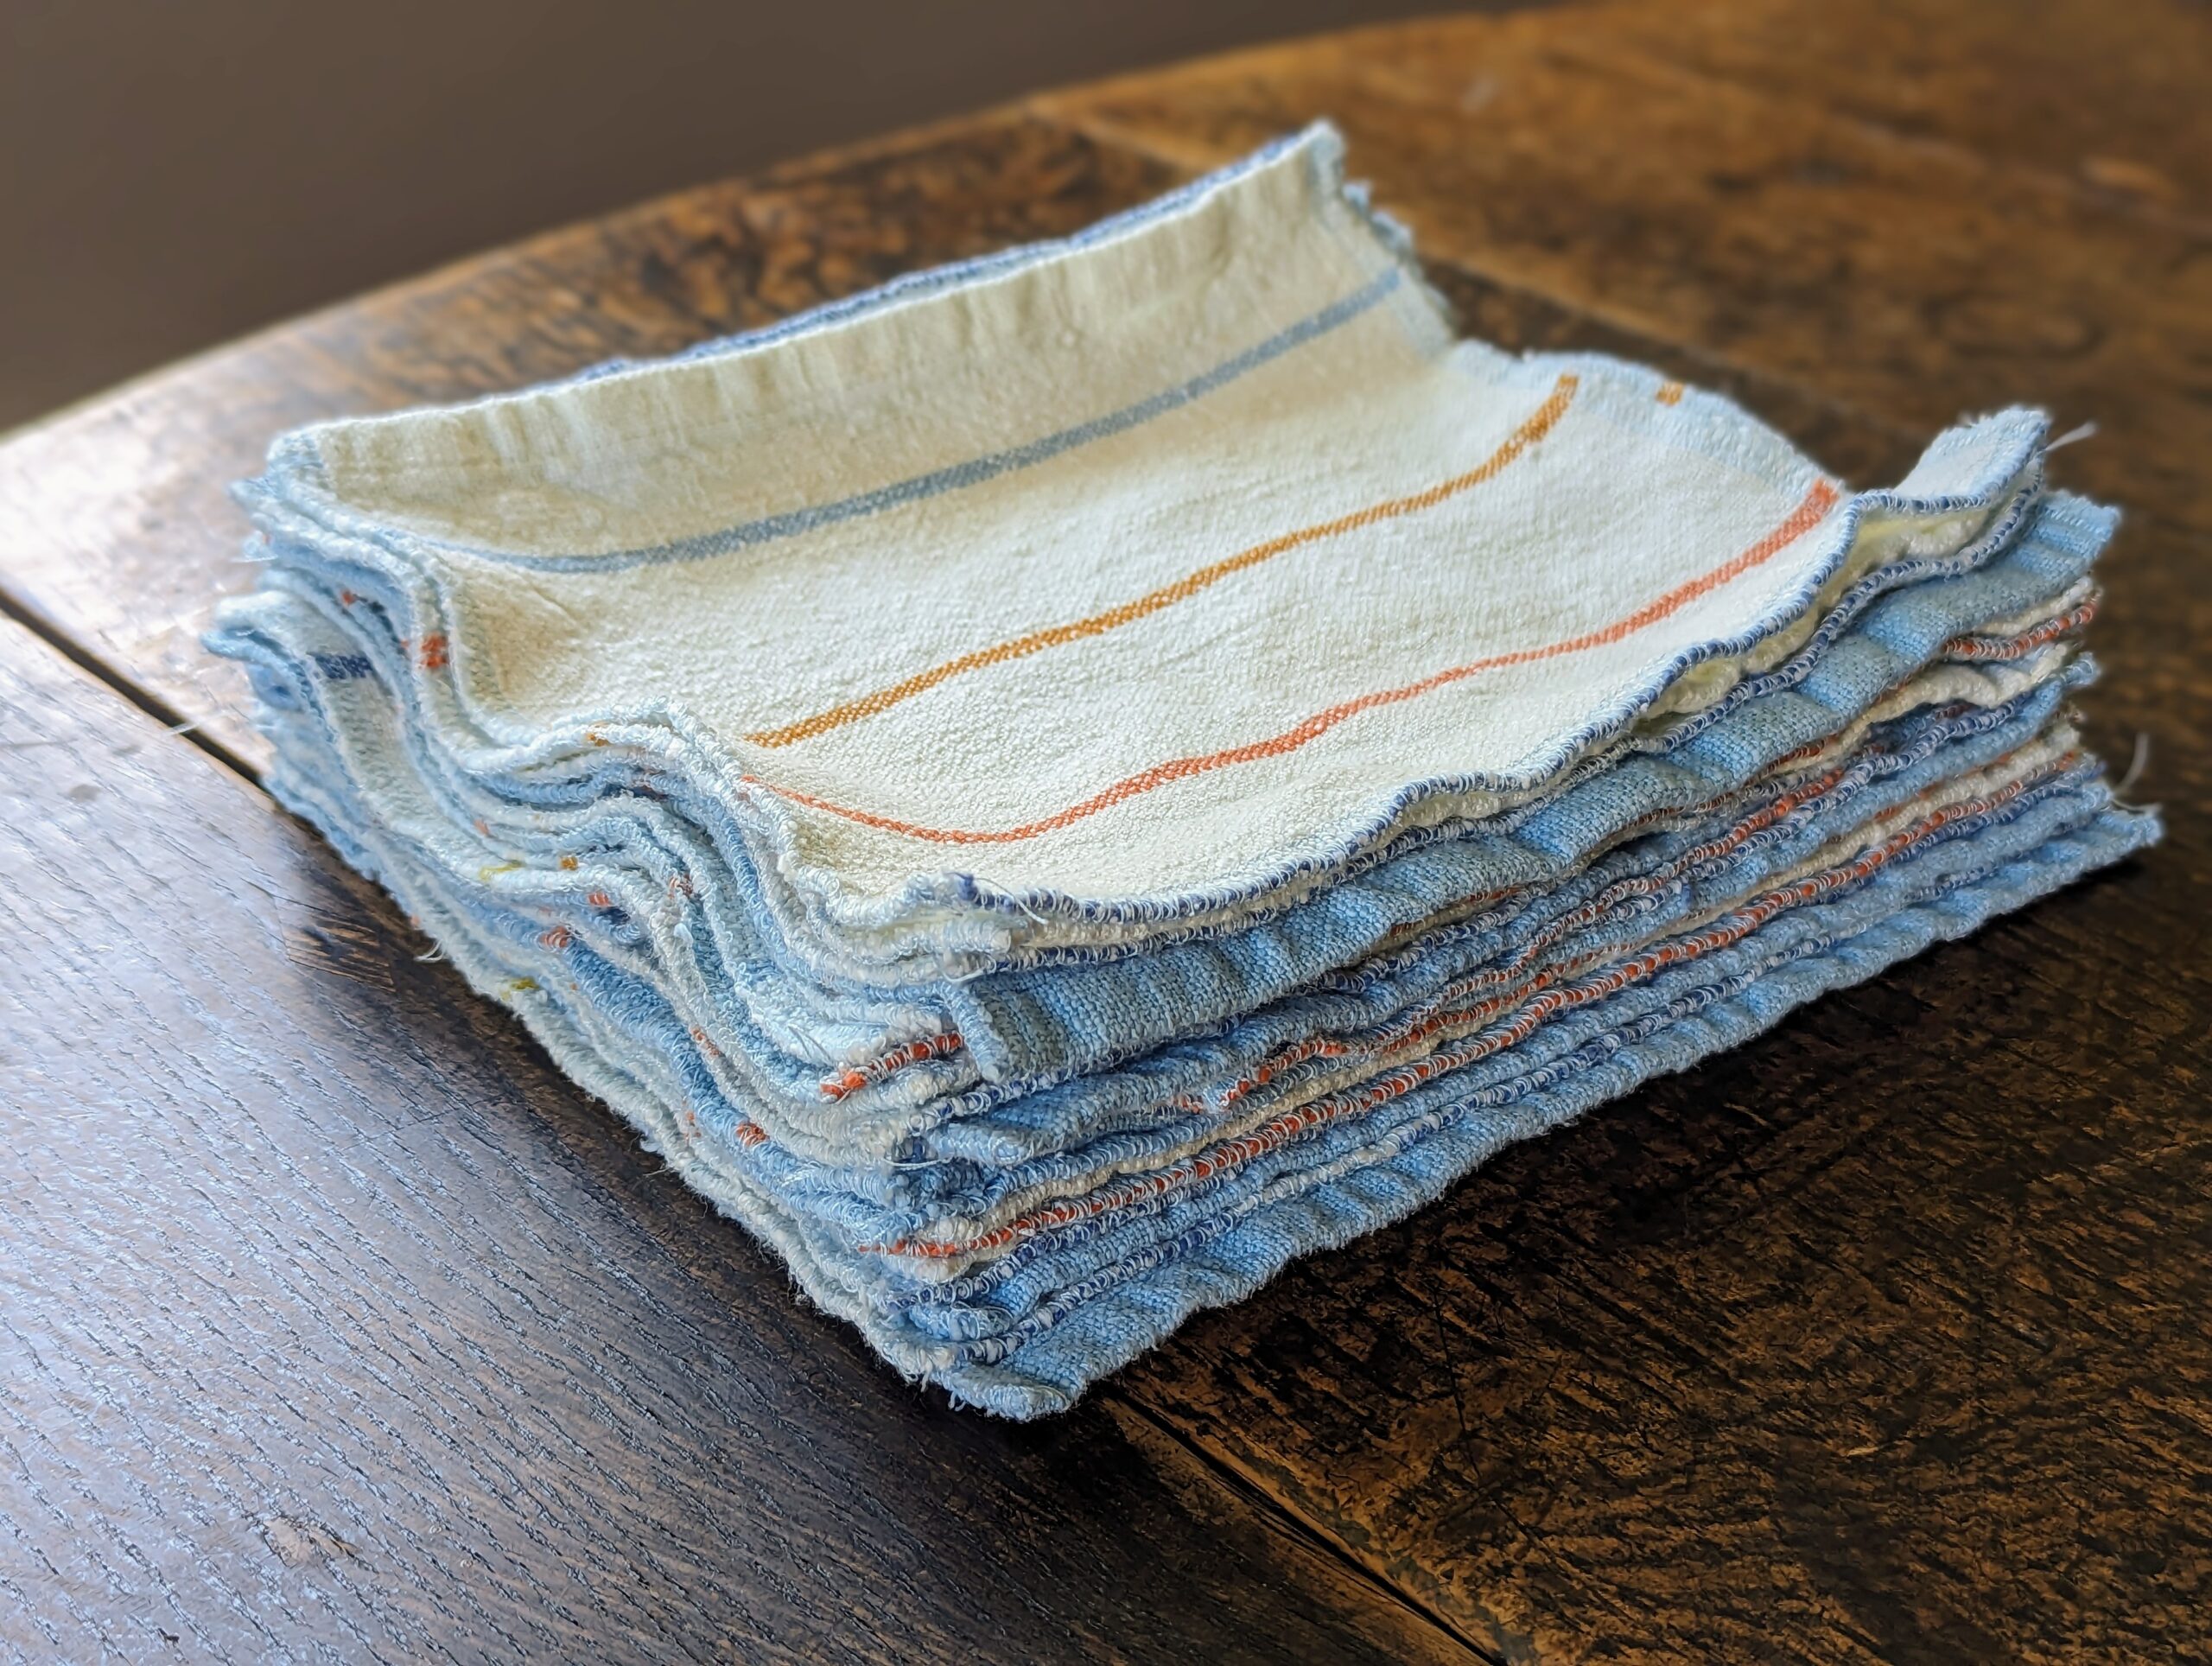 A stack of cotton dish cloths, not folded.